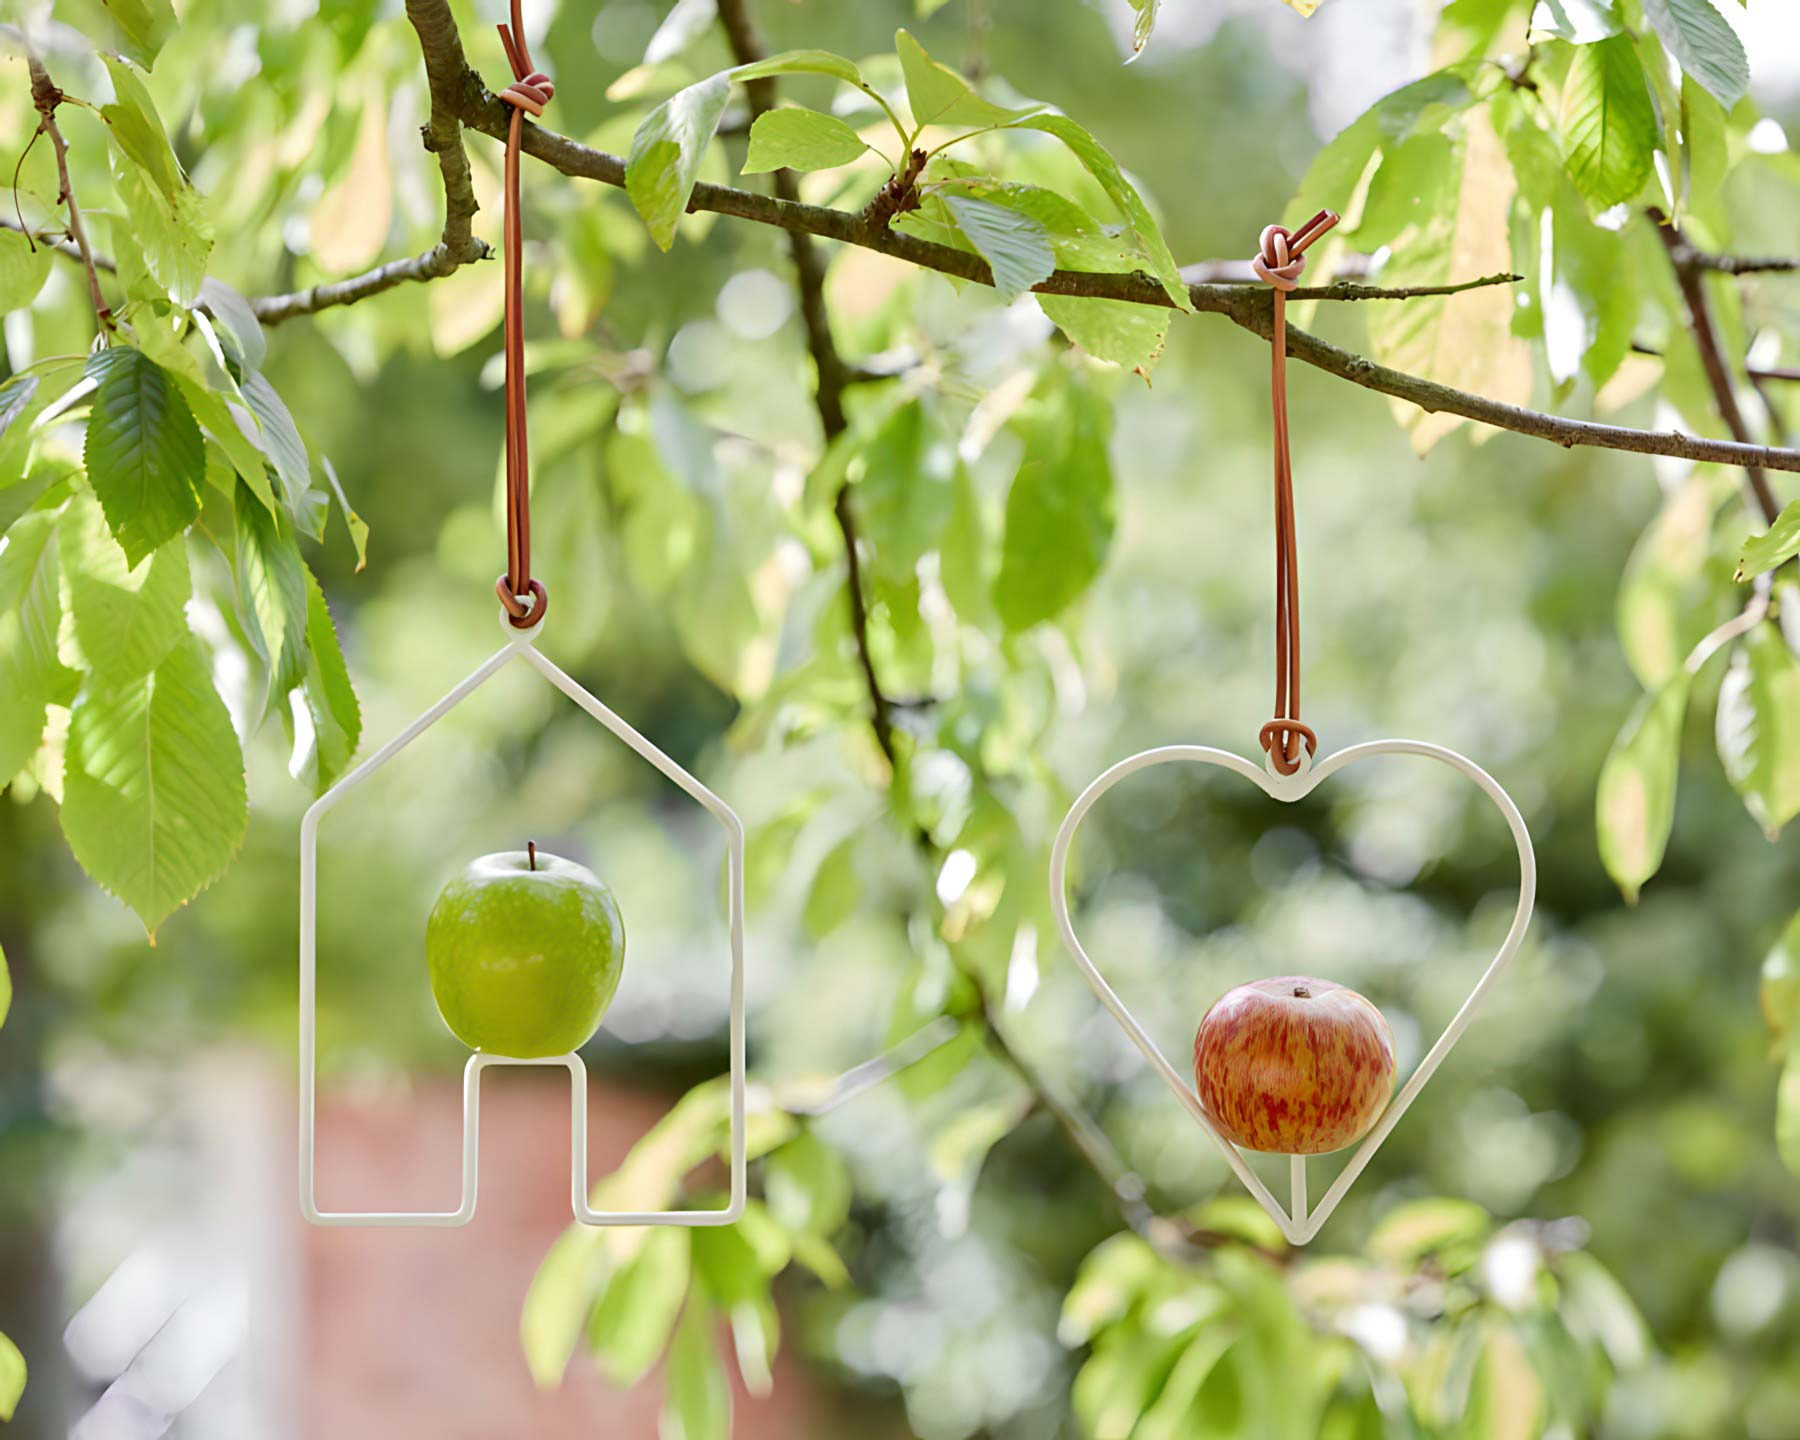 Apple Bird Feeders by Sophie Conran available in 2 designs - House and Heart